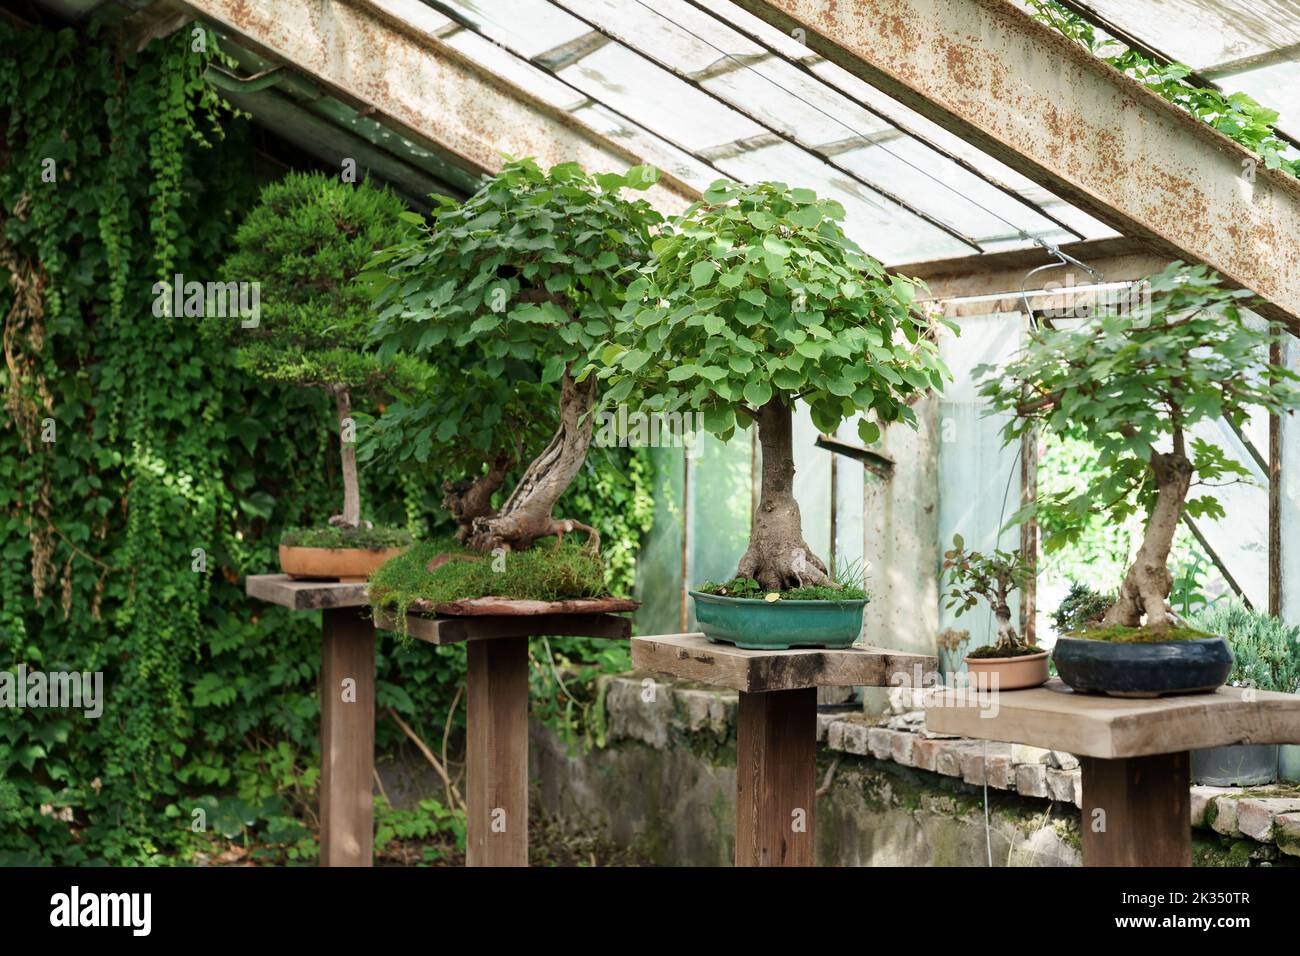 Exhibition and exploration of bonsai trees standing on wooden racks in botanical greenhouse garden Stock Photo